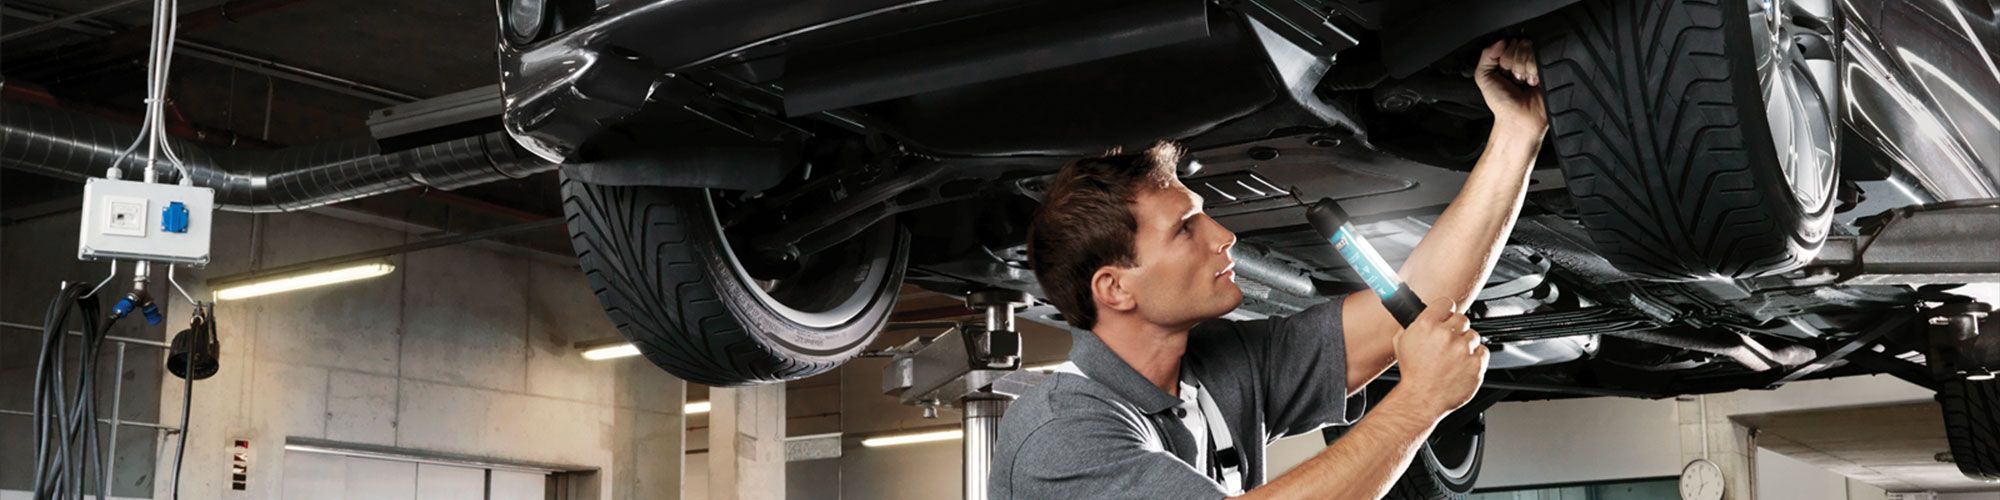 Toyota Servicing in Perth and Dundee at Struans